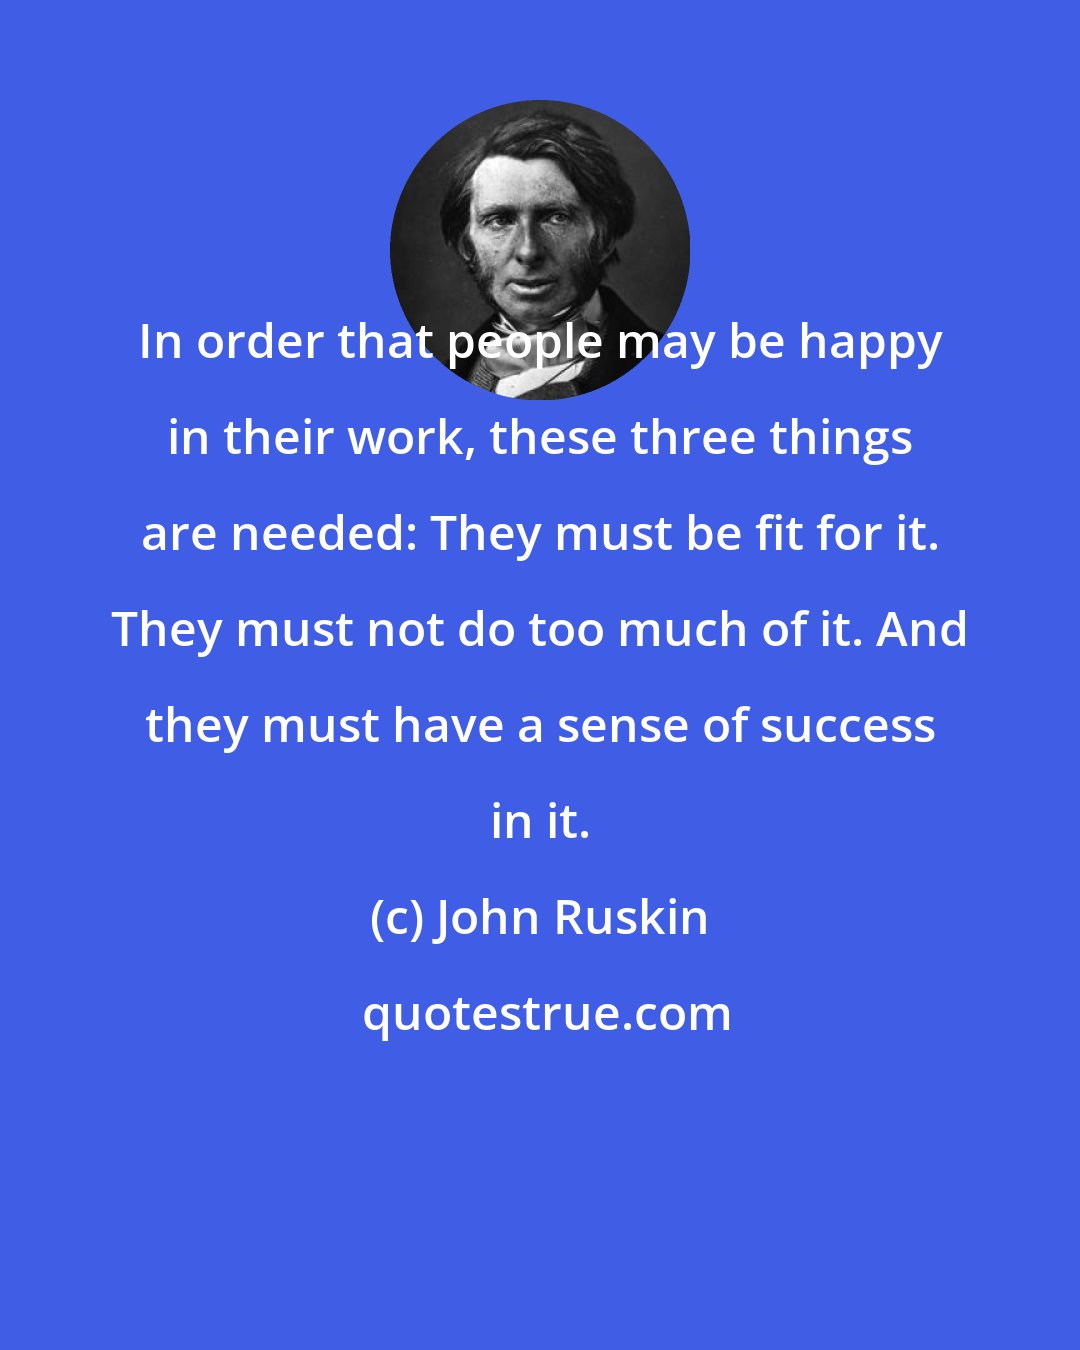 John Ruskin: In order that people may be happy in their work, these three things are needed: They must be fit for it. They must not do too much of it. And they must have a sense of success in it.